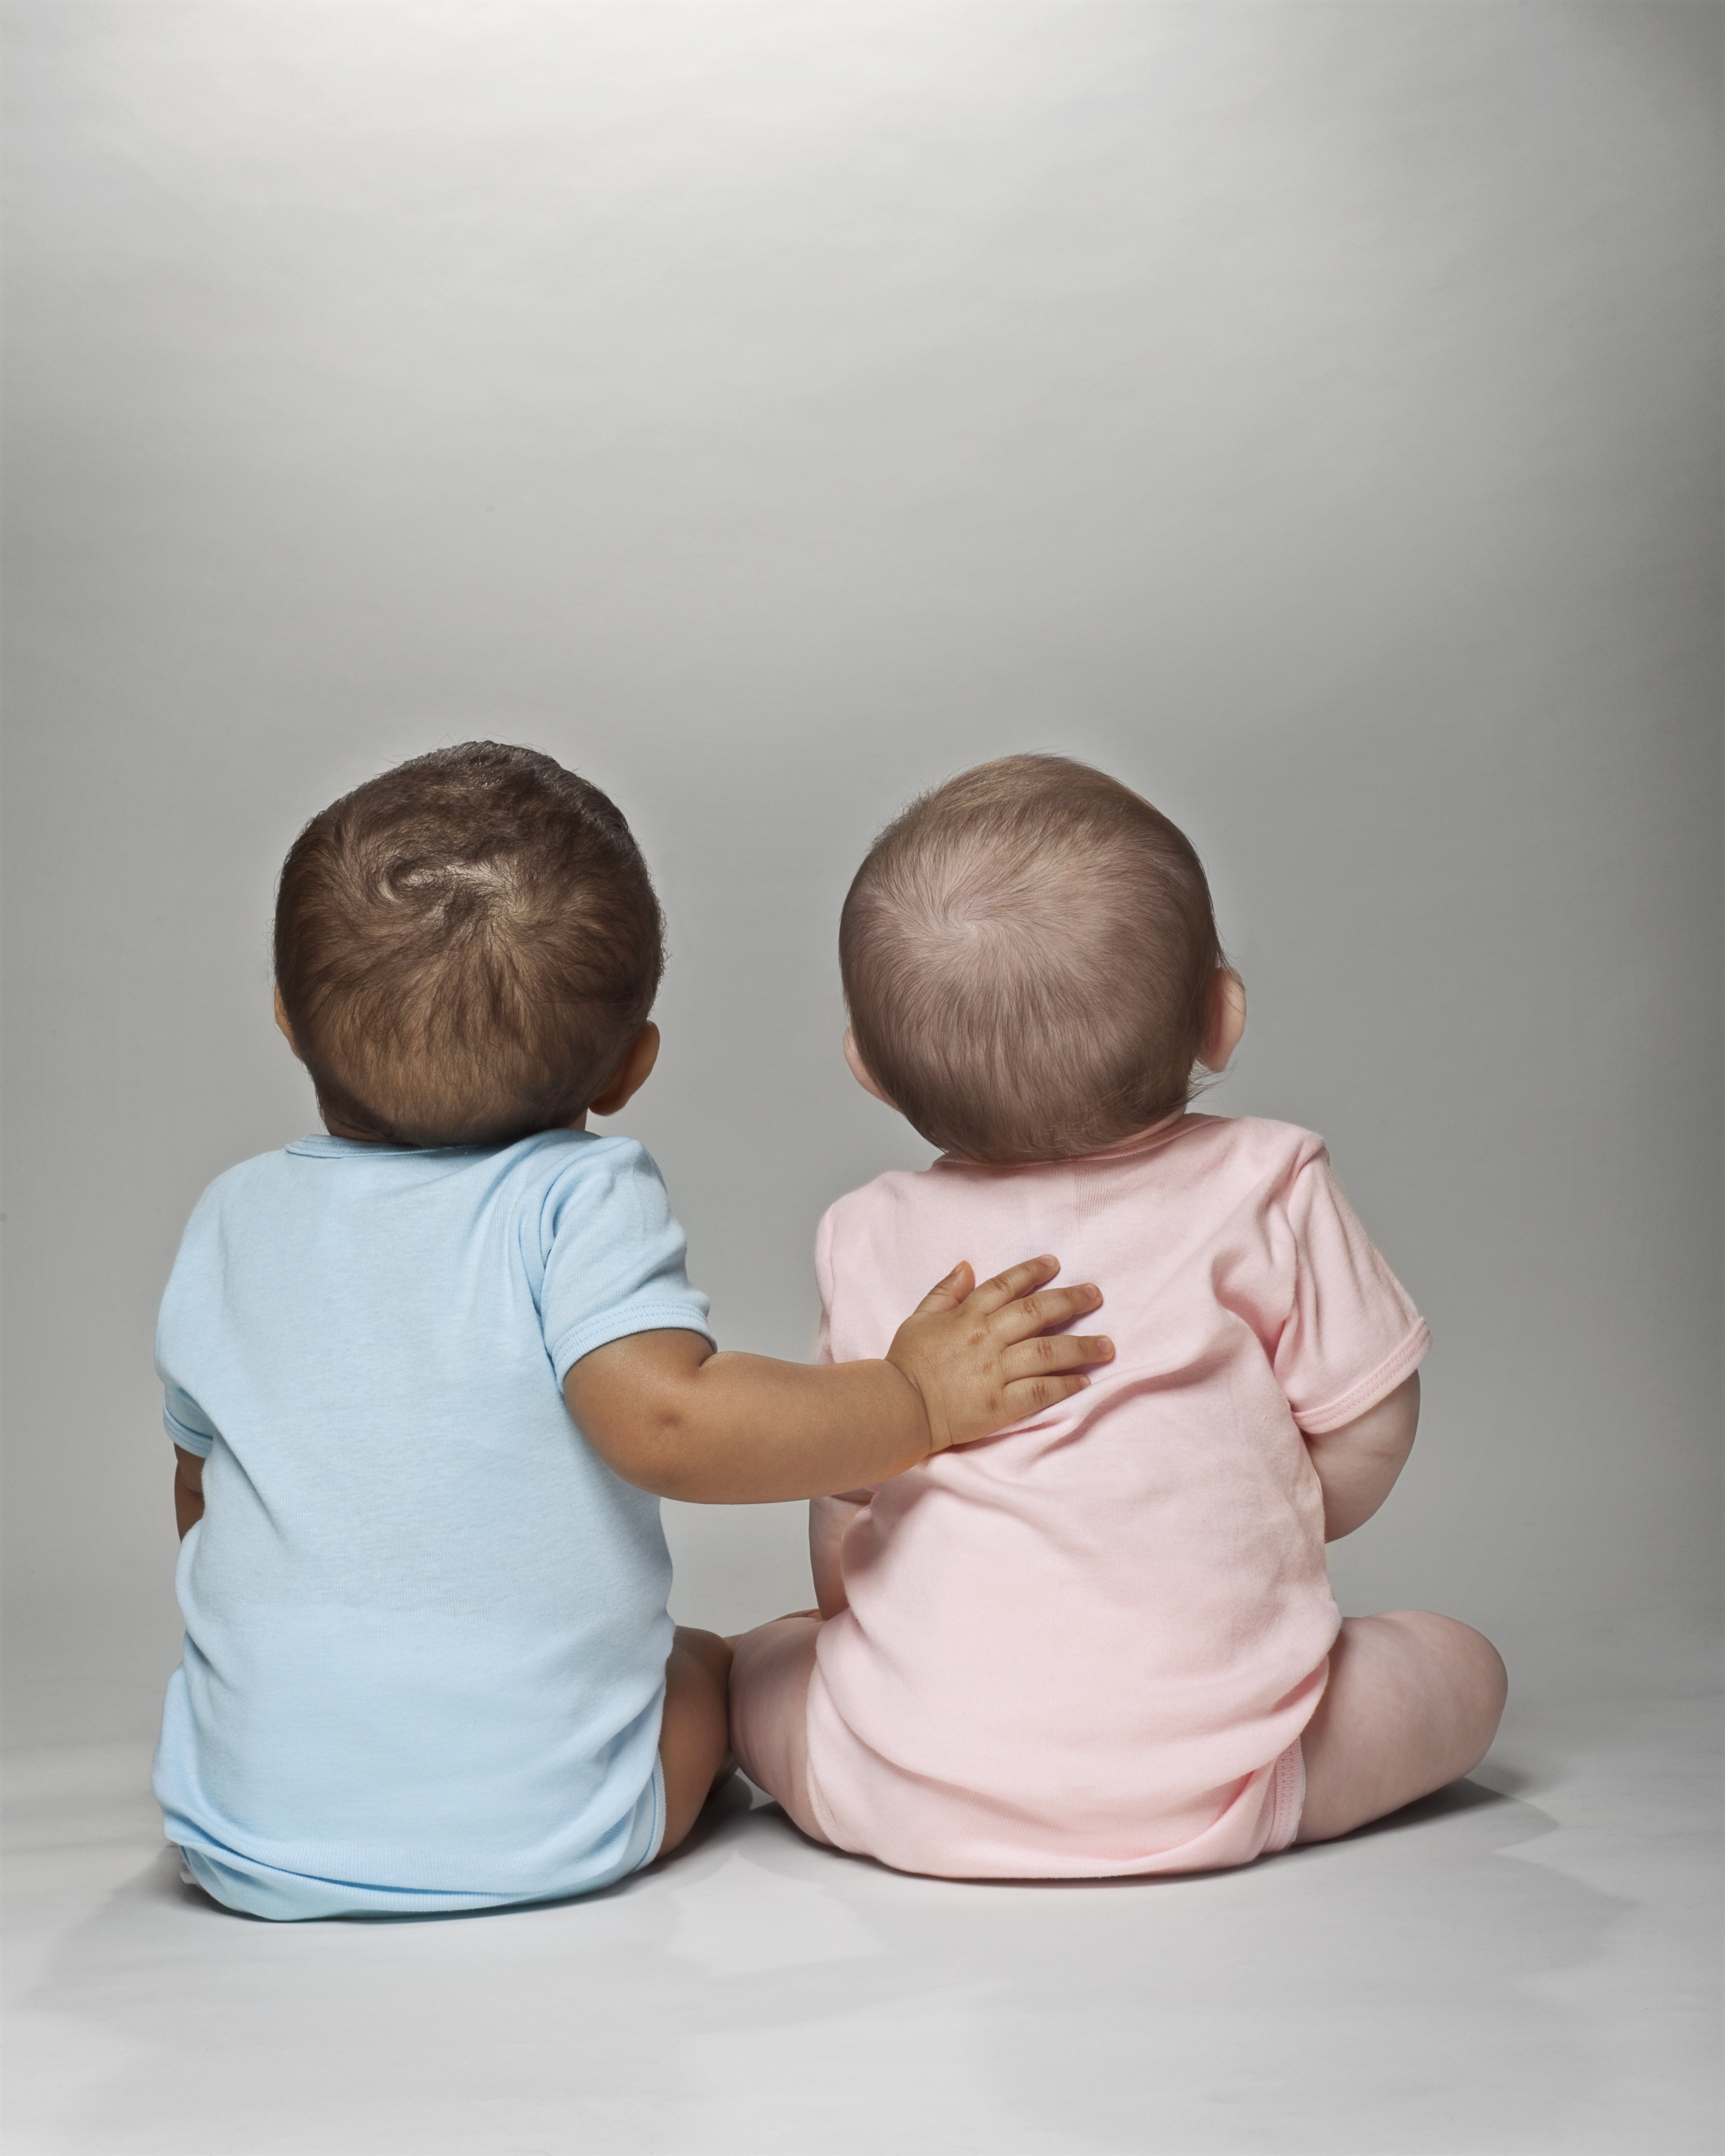 Two babies sit on the floor together. | Source: Getty Images